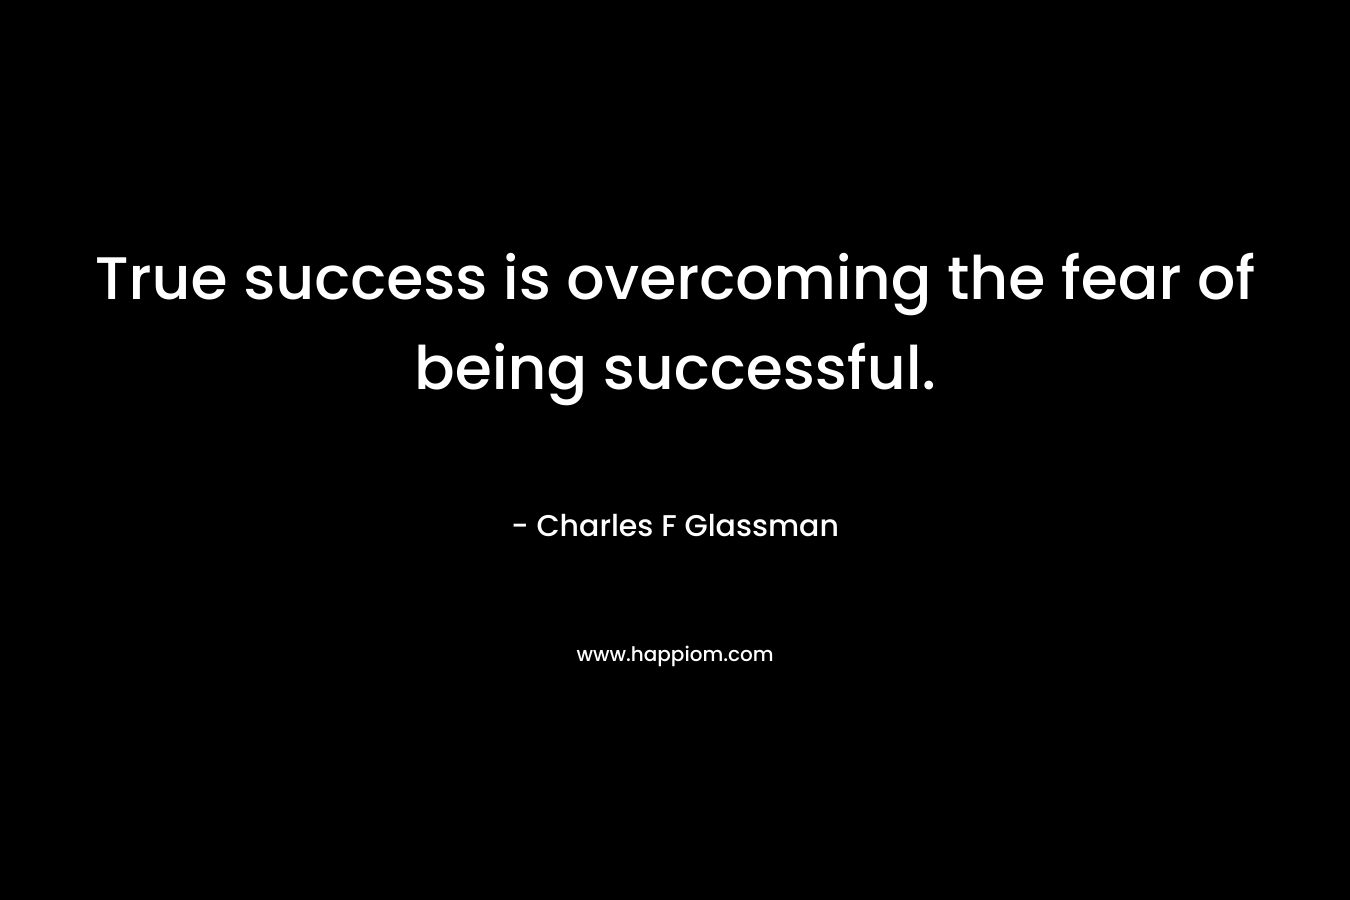 True success is overcoming the fear of being successful.